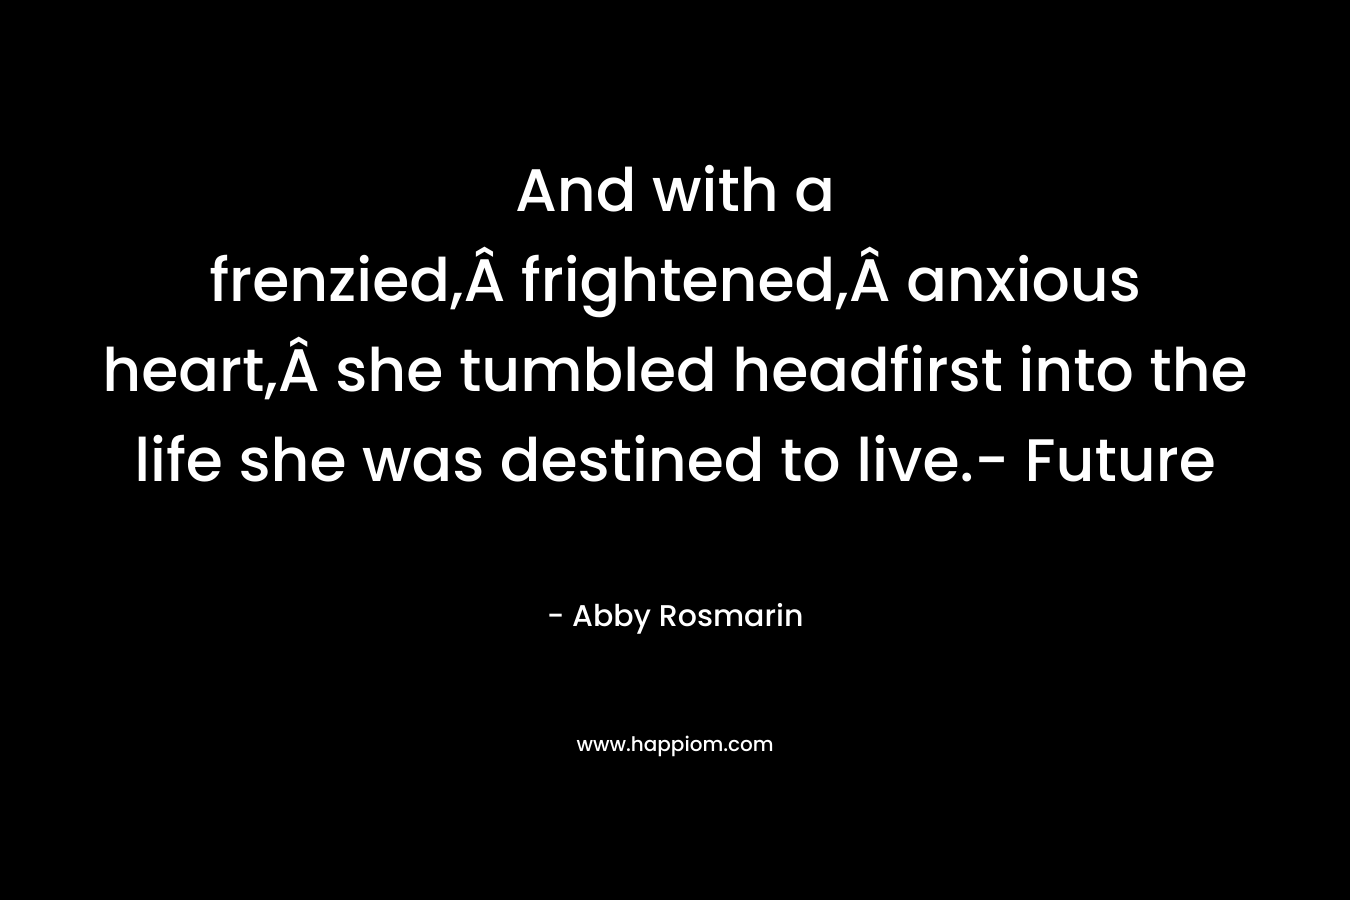 And with a frenzied,Â frightened,Â anxious heart,Â she tumbled headfirst into the life she was destined to live.- Future – Abby Rosmarin